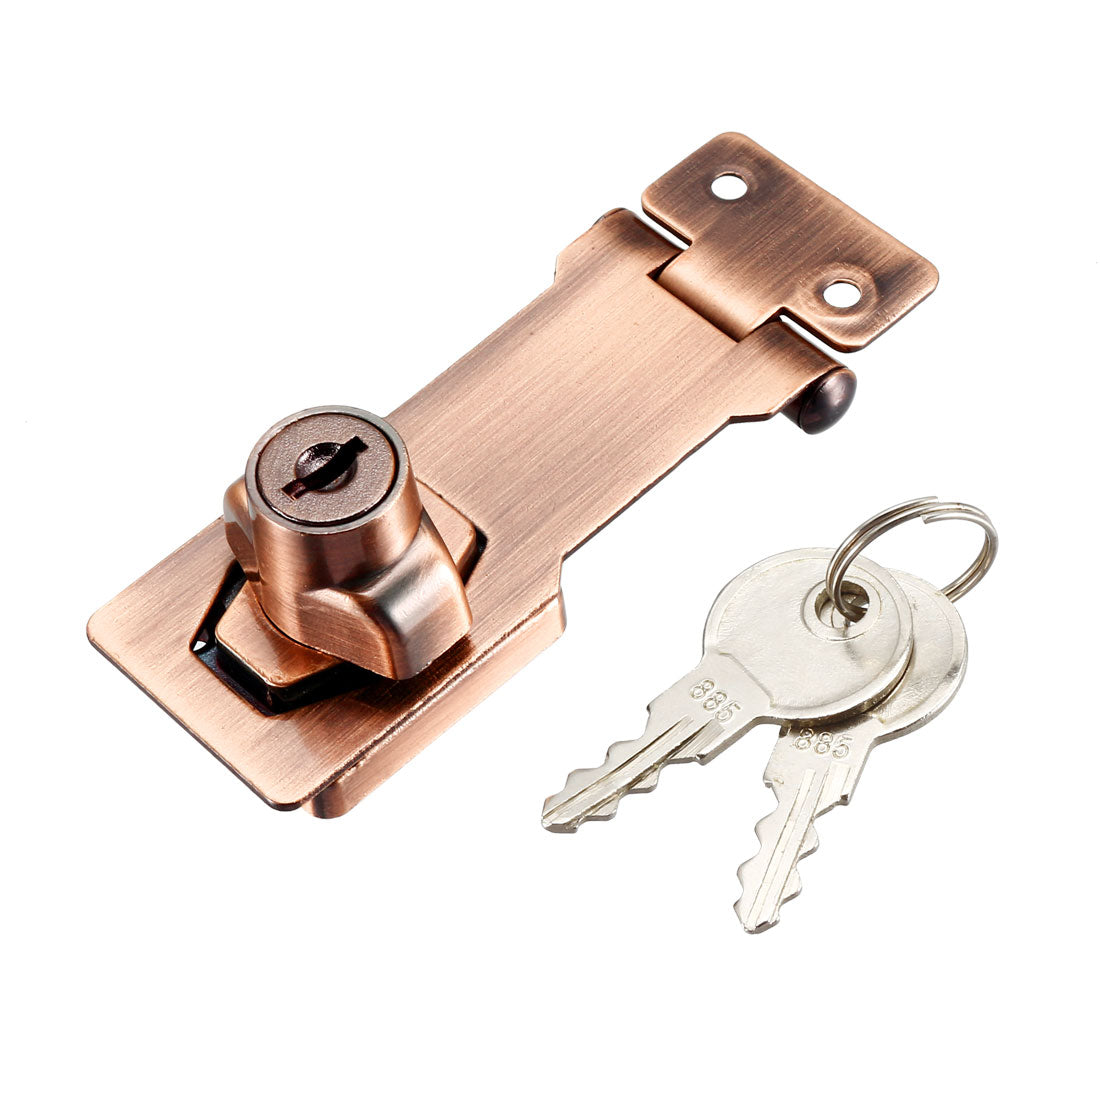 uxcell Uxcell Keyed Hasp Lock 94mm Twist Knob Keyed Locking Hasp for Door Cabinet Keyed Different Red Copper Tone